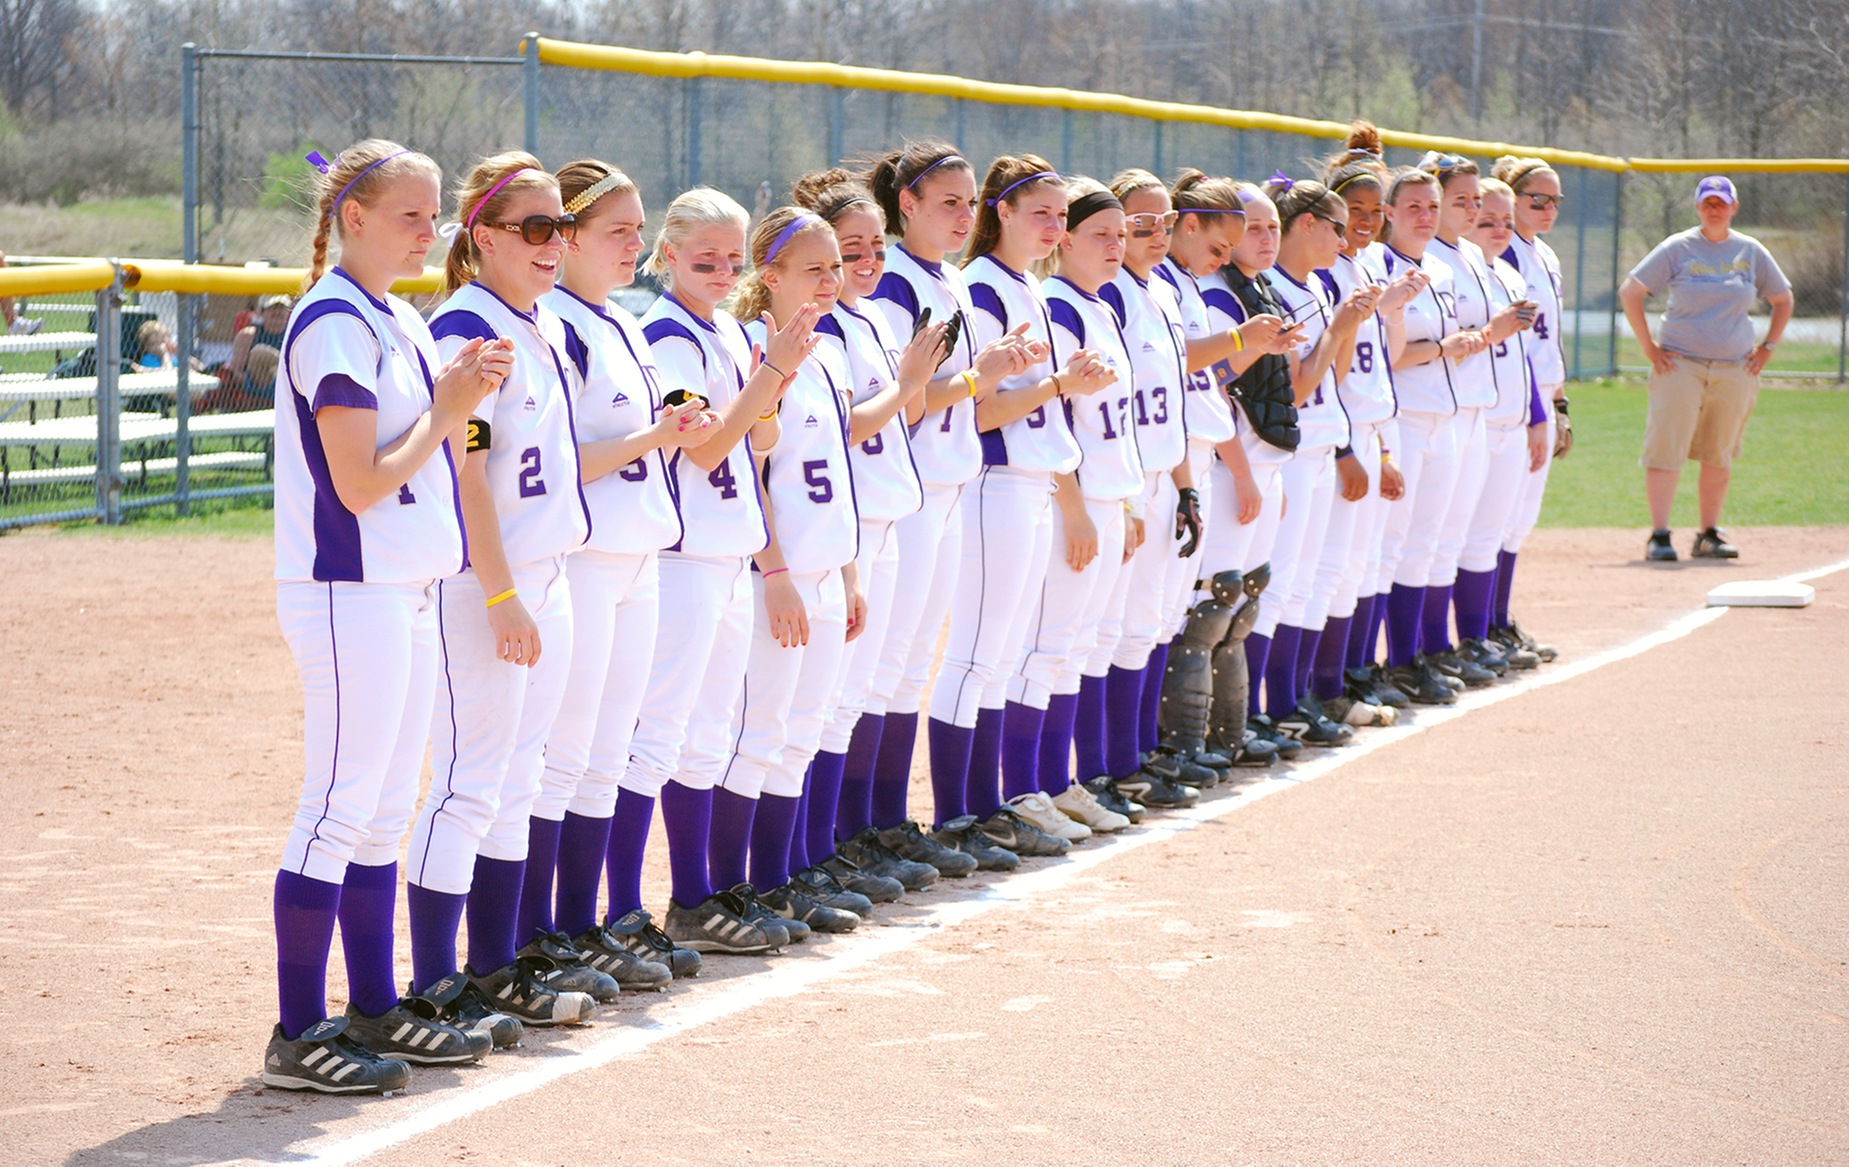 DC to Start Defense of HCAC Tournament Title This Weekend